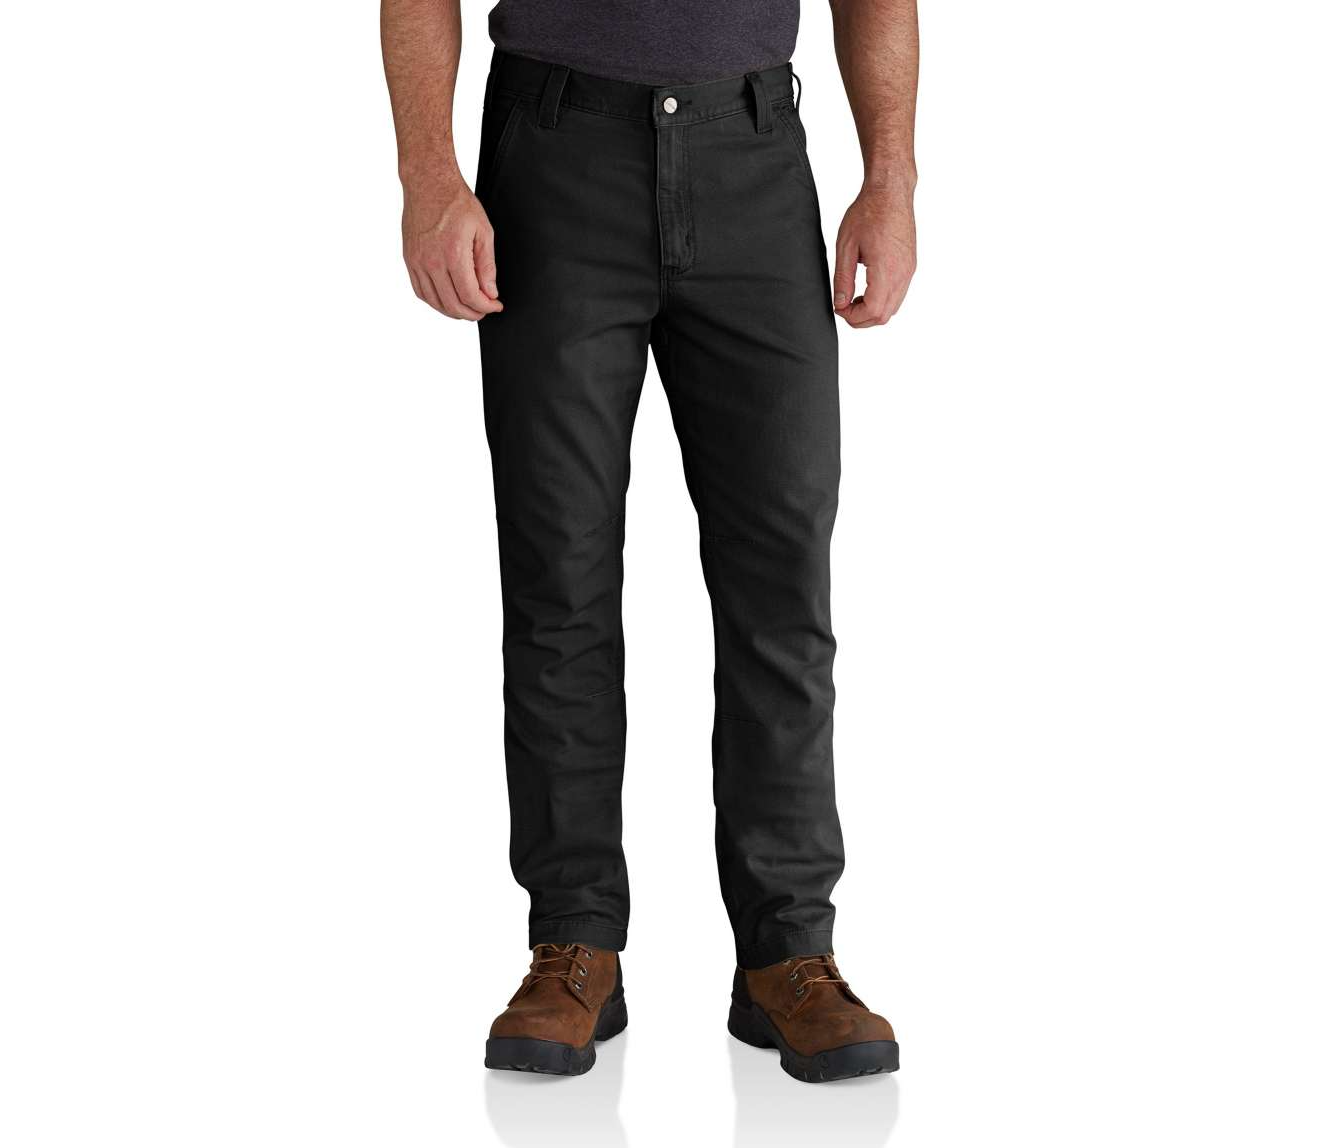 Carhartt RIGBY STRAIGHT FIT PANT